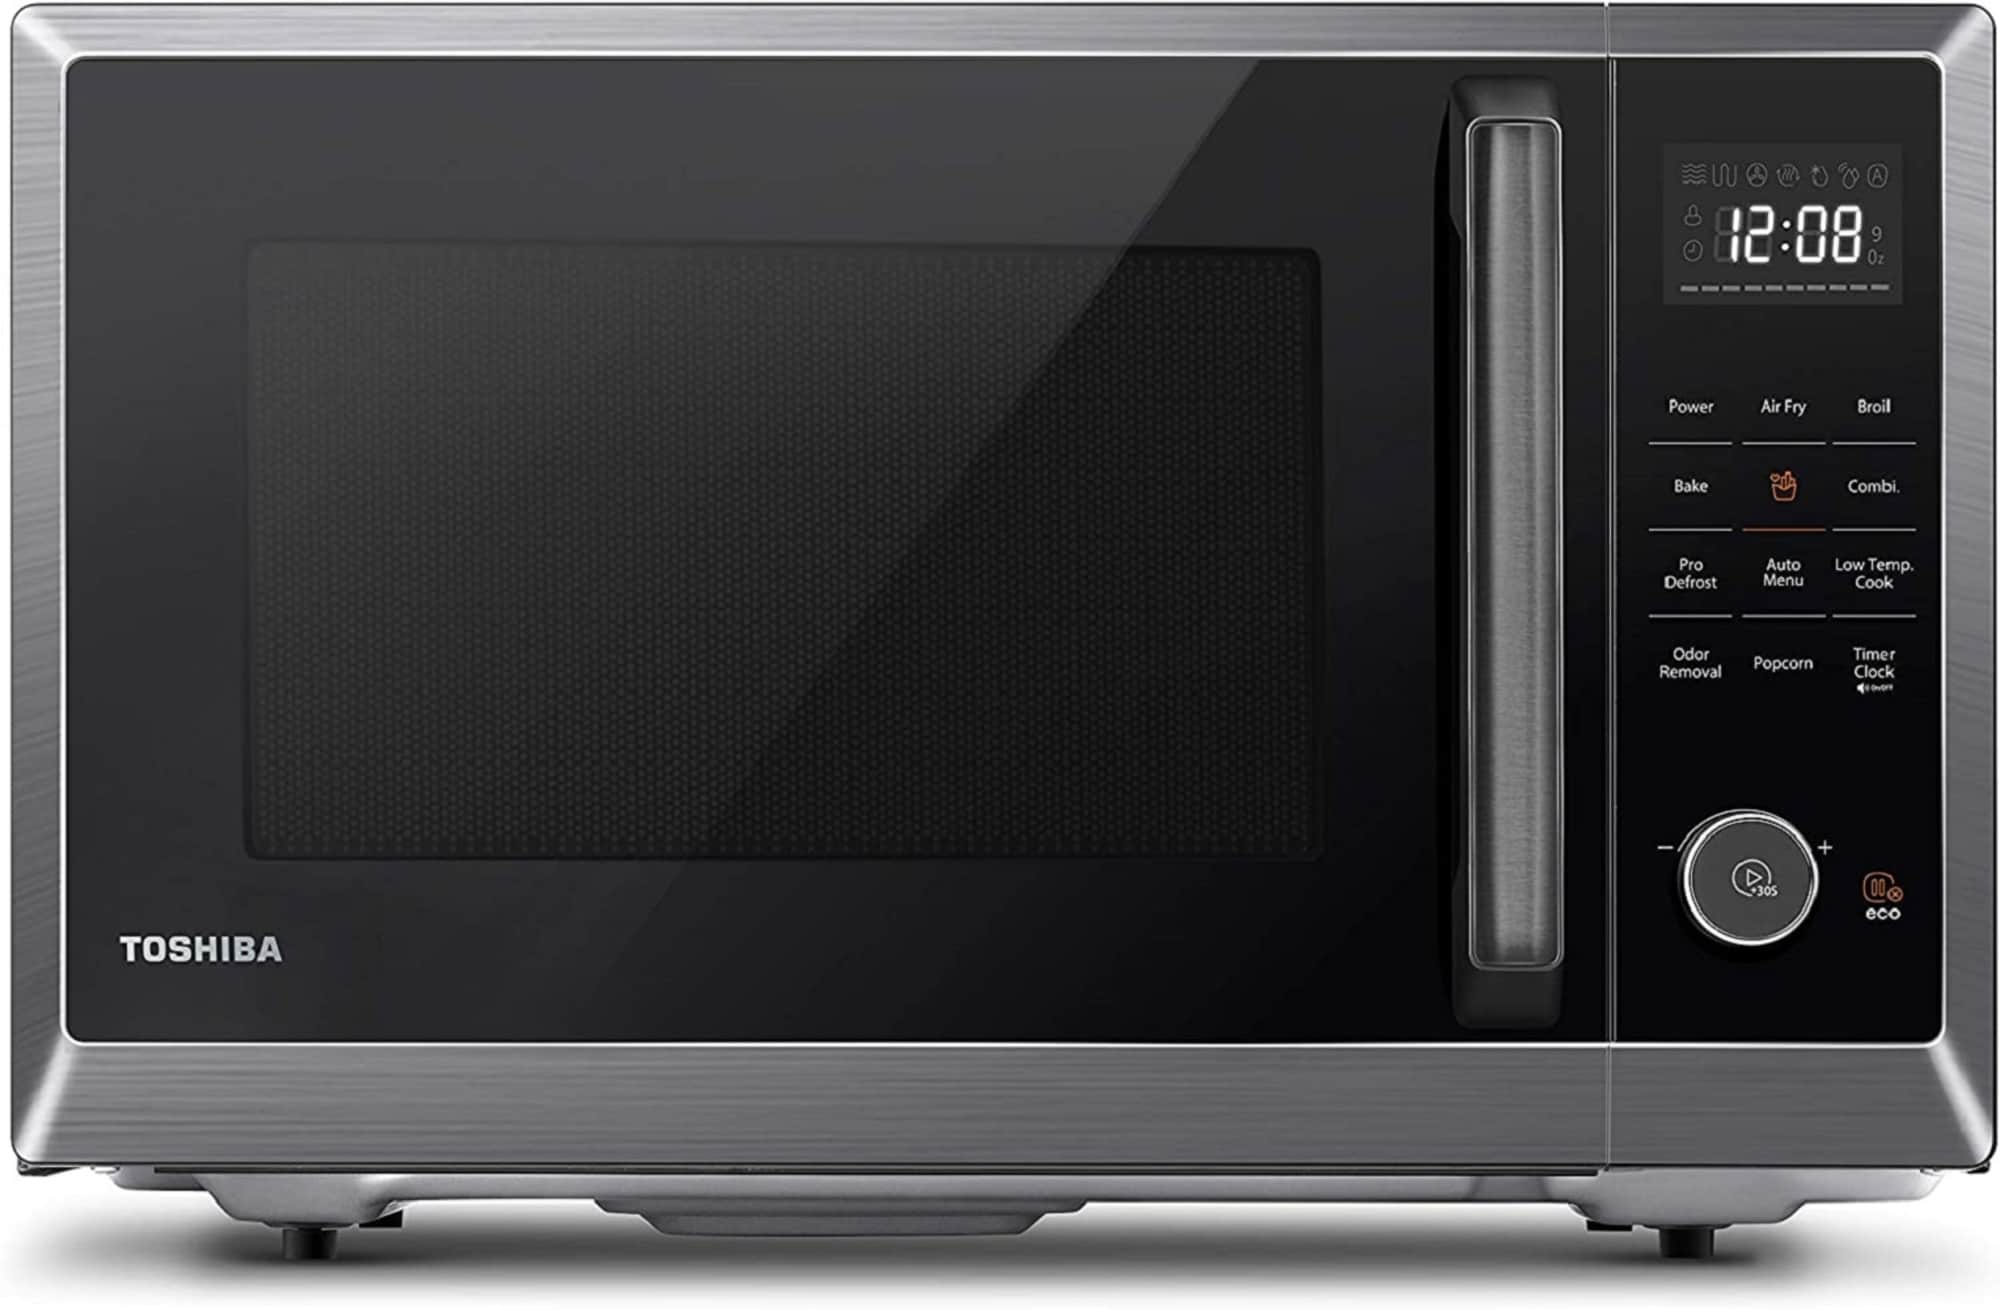 Toshiba 4-in-1 Microwave FULL REVIEW!!! 